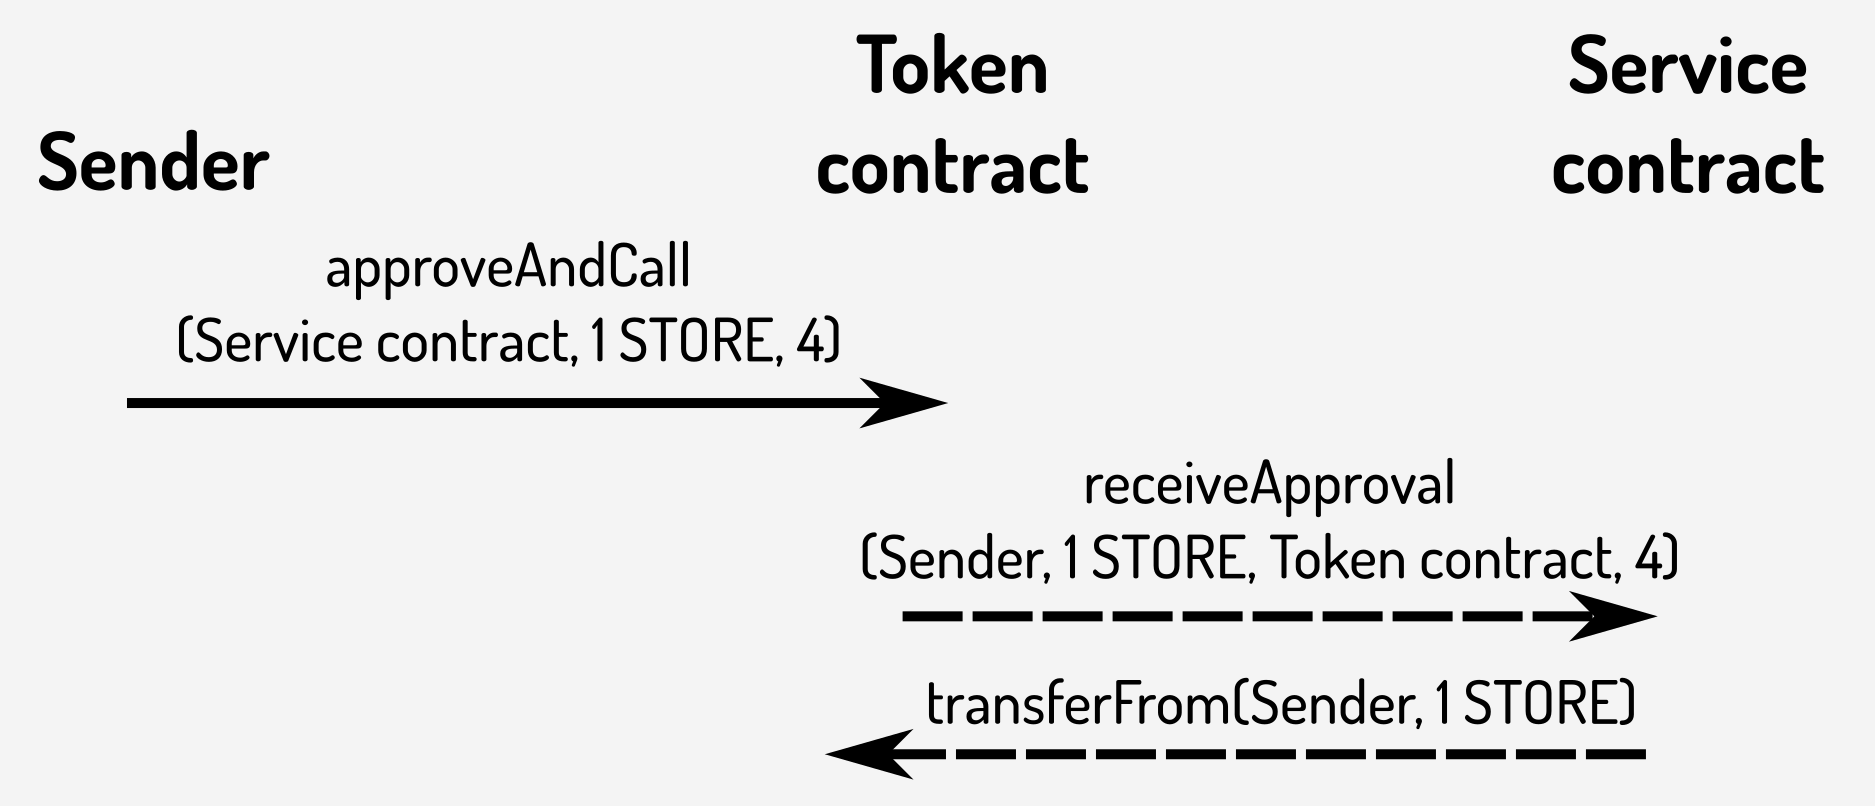 Using approveAndCall() to pay for a service contract function with a token